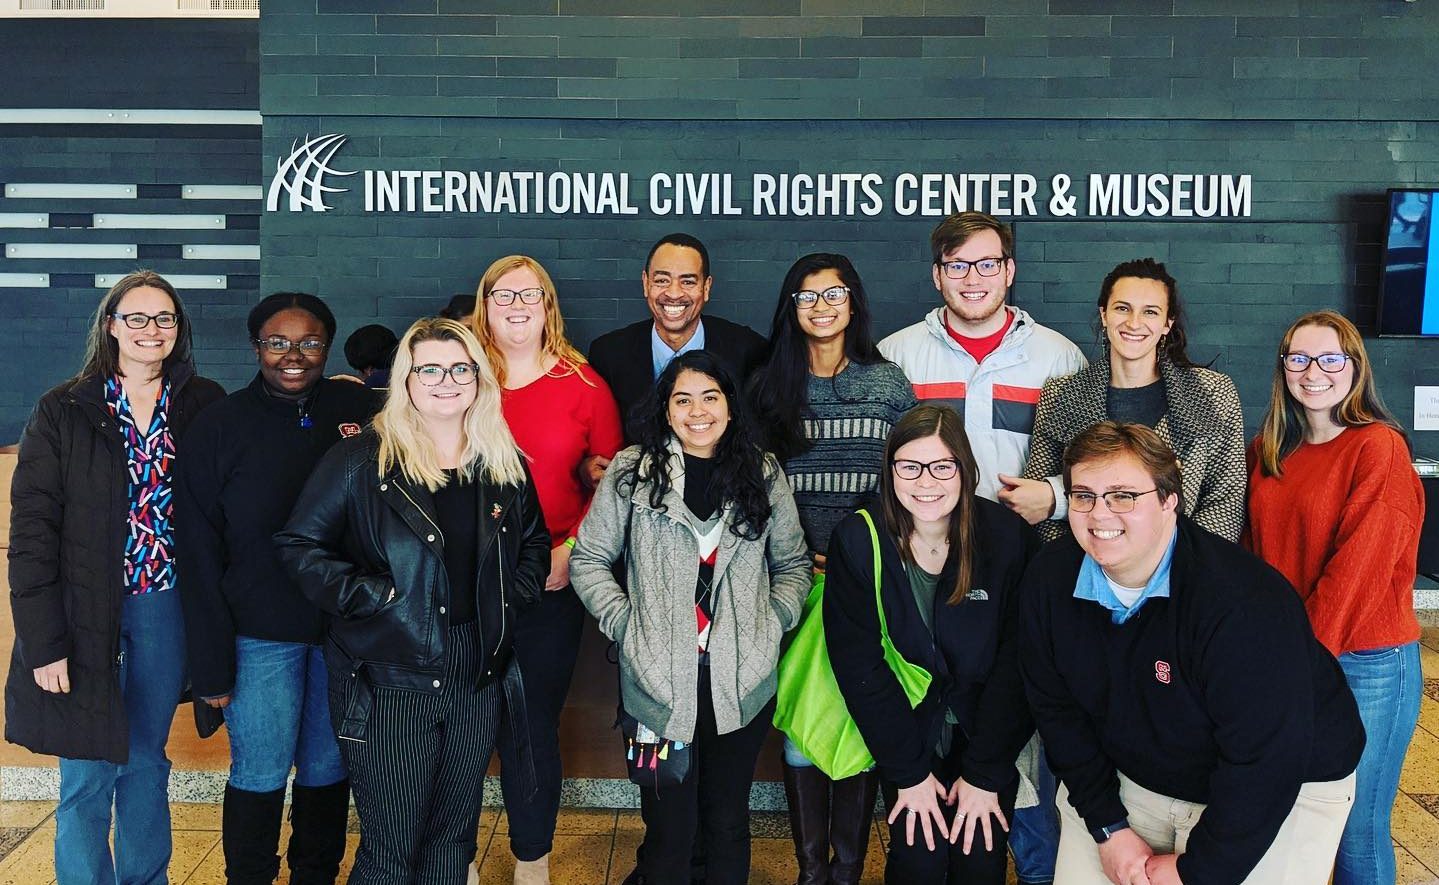 group of people posing in front of the International Civil Rights Center and Museum